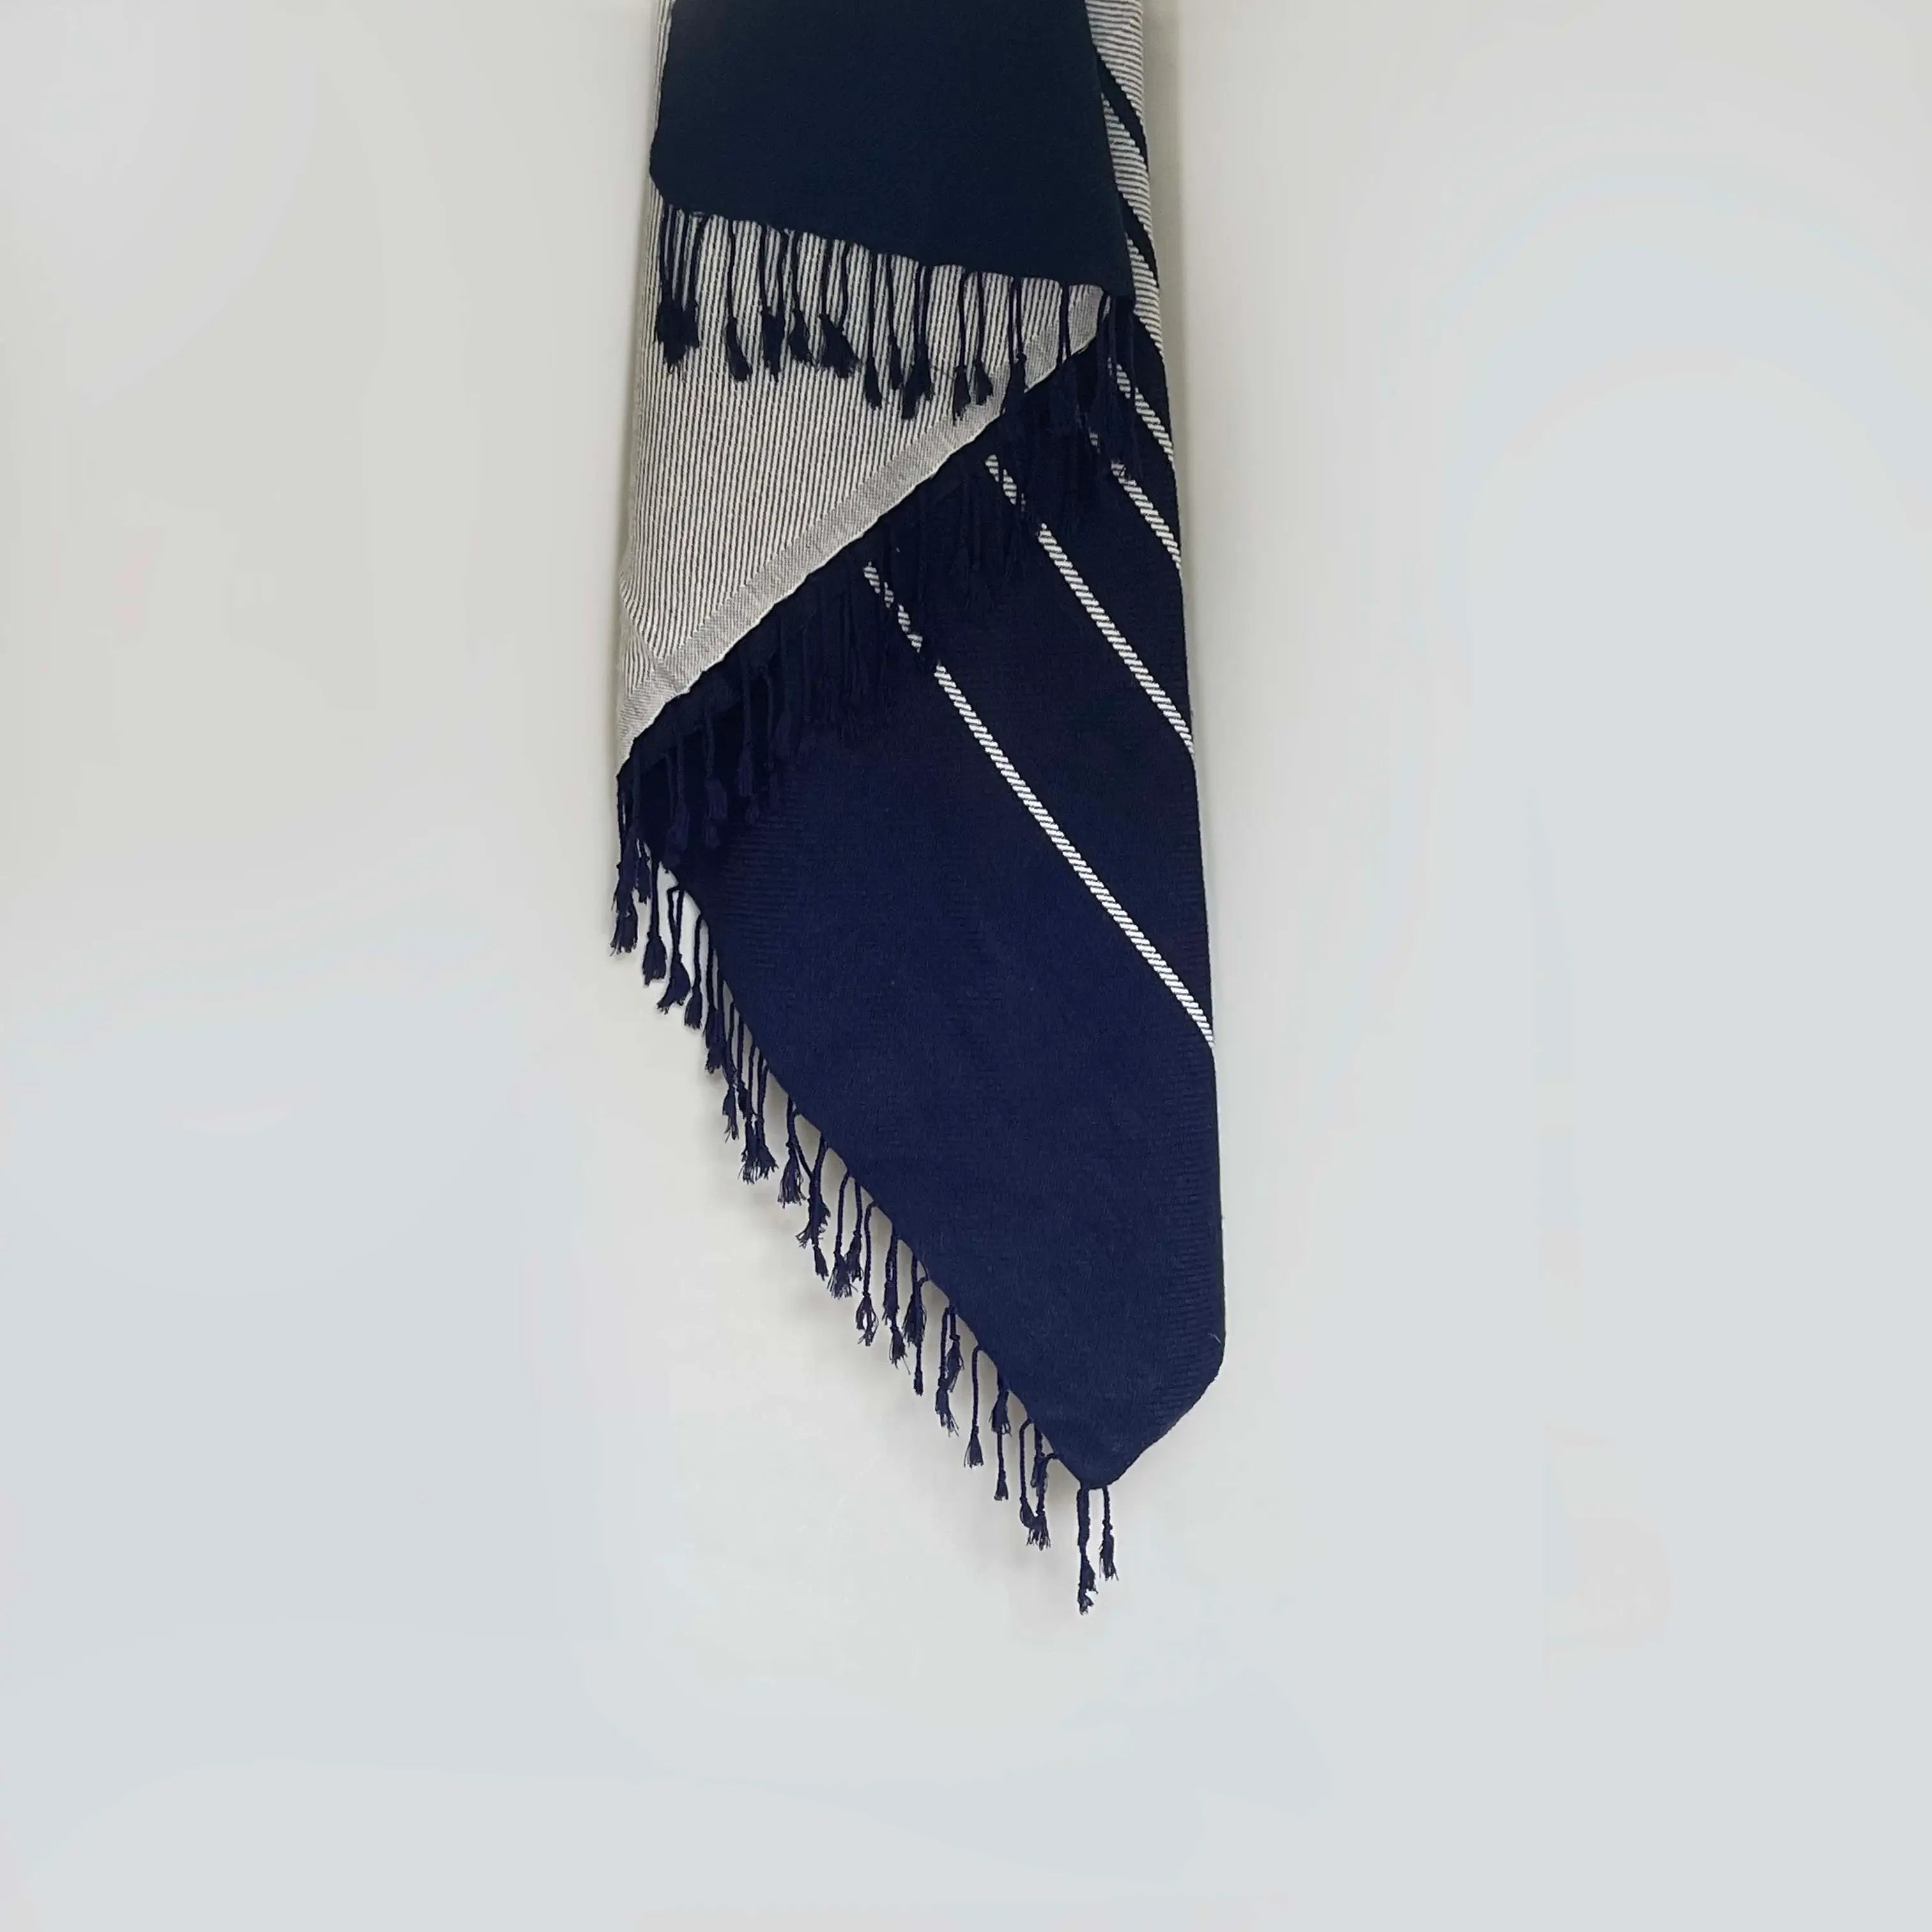 Dounia home Throw towel in Midnight blue made of Wool and cotton, Model: Tala